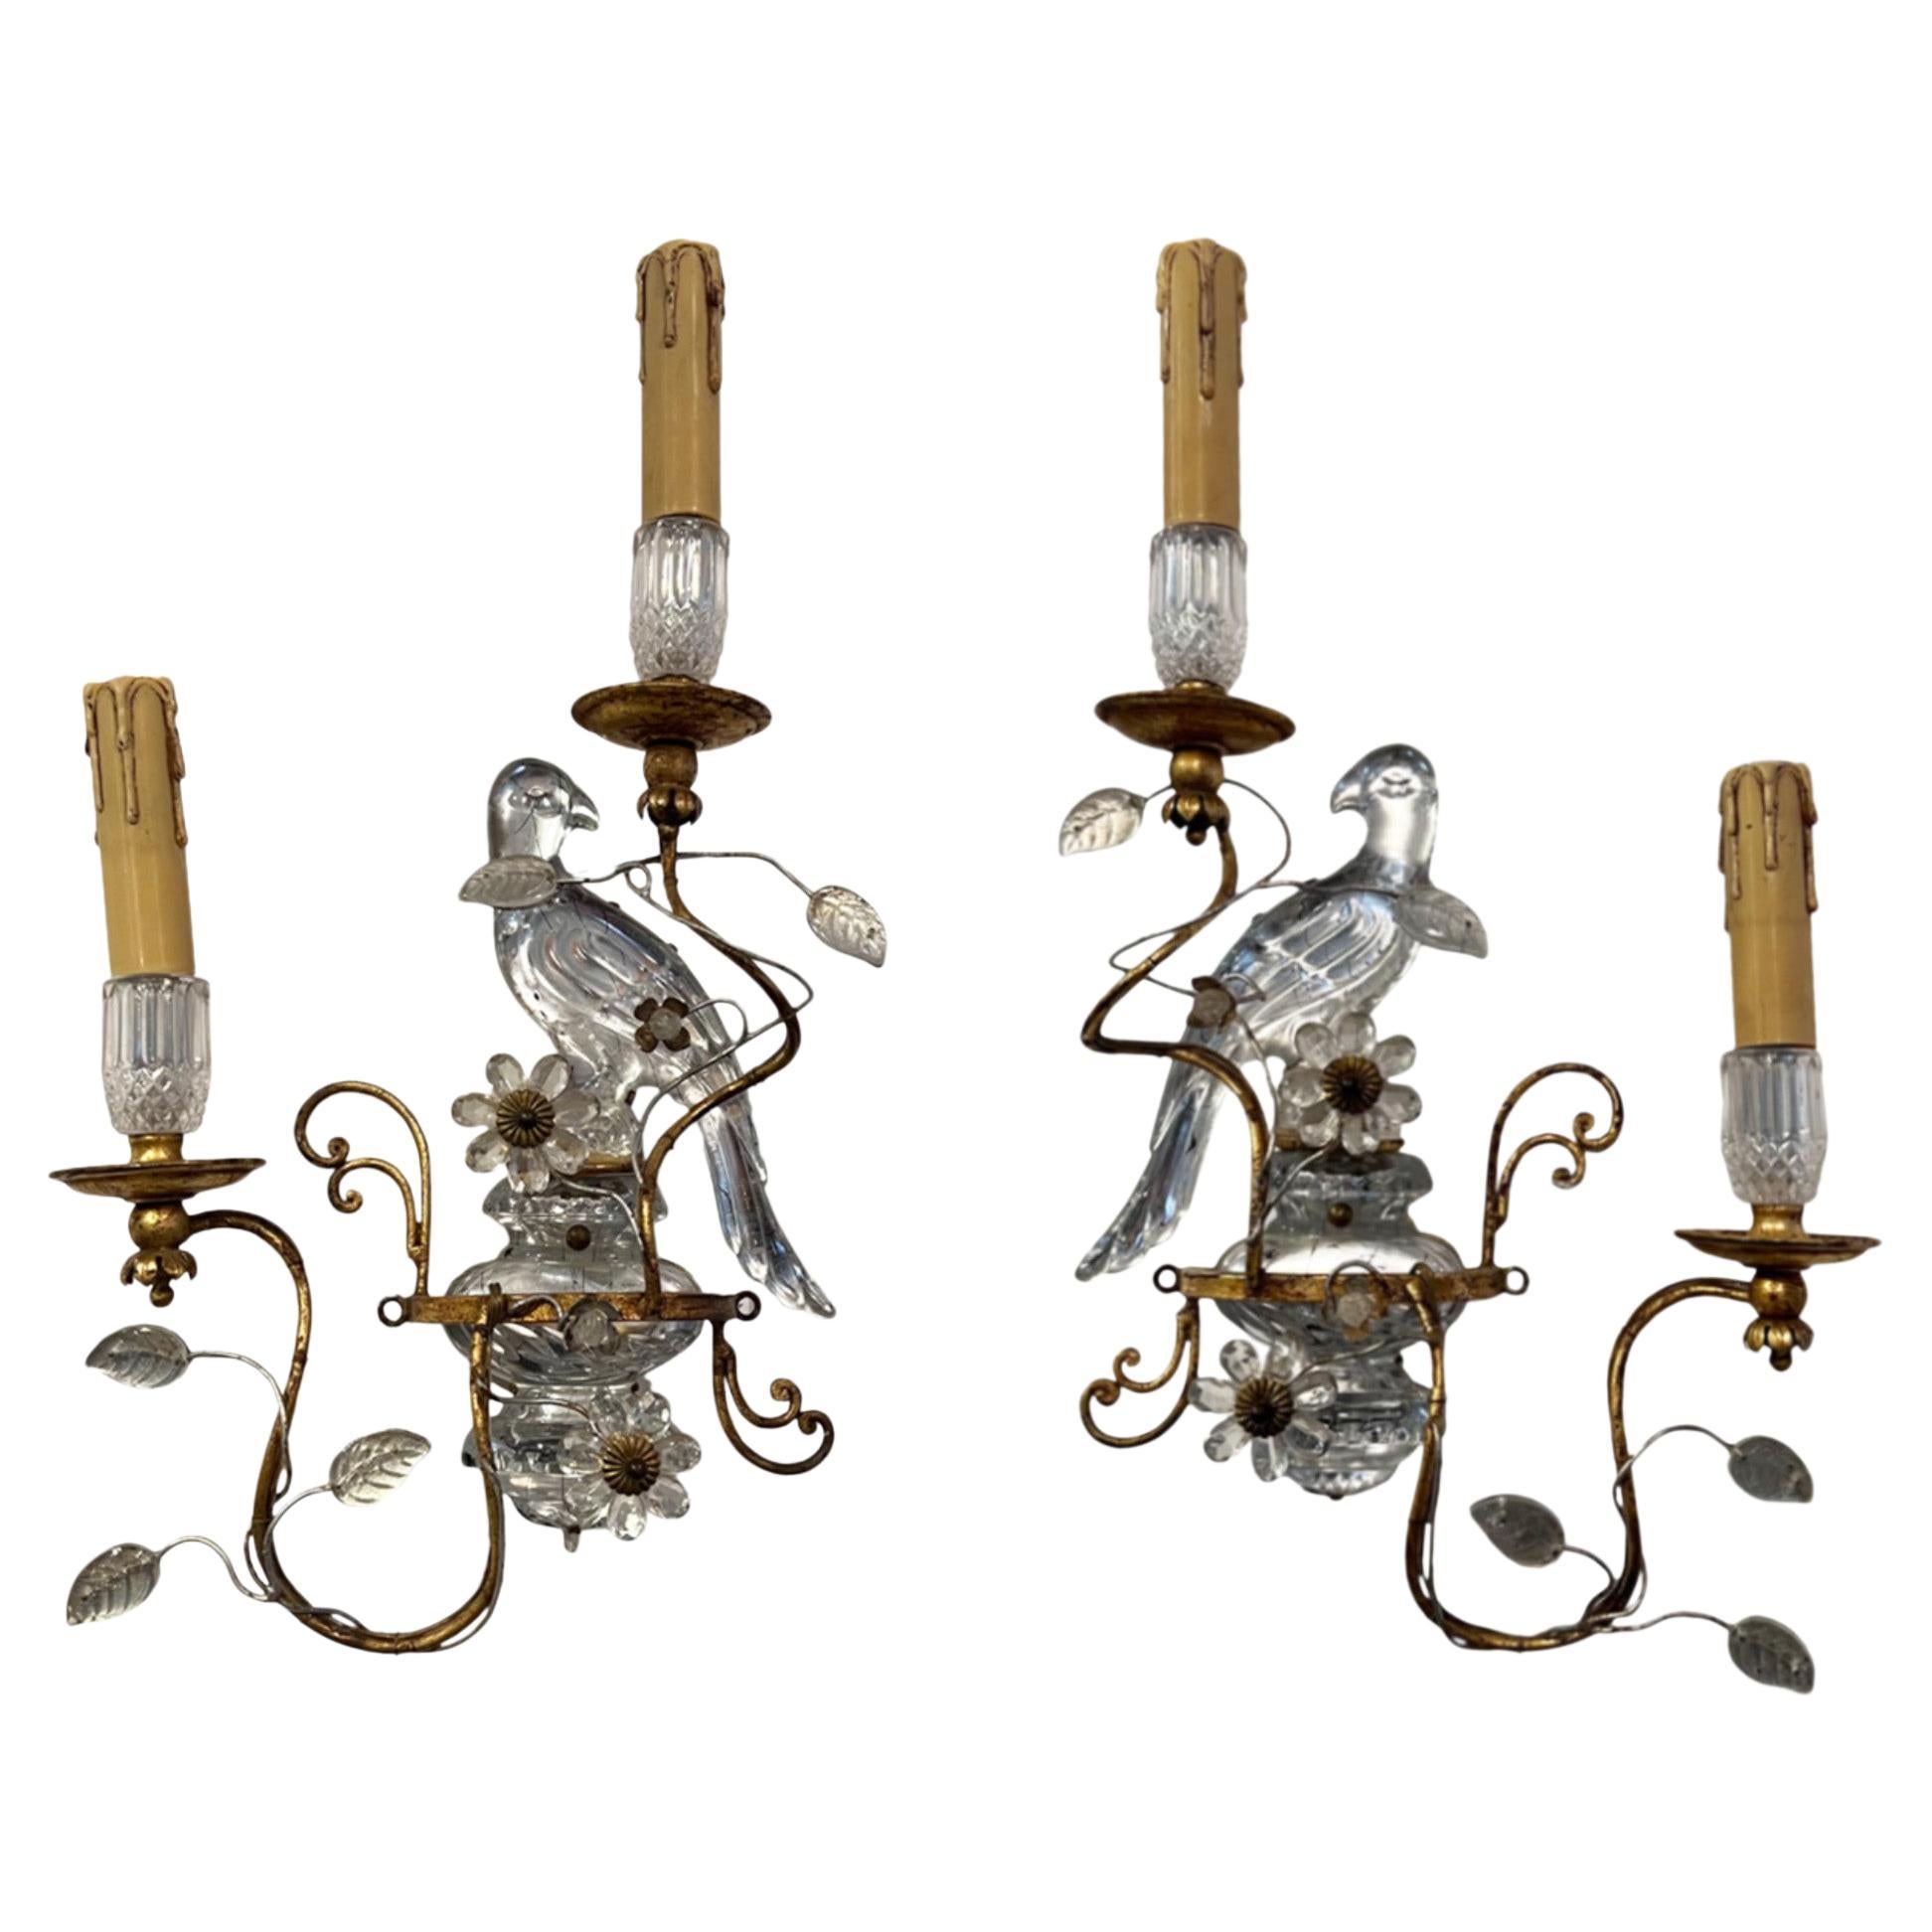 Pair of 1960s Banci Wall Sconces with Parrots and Urns